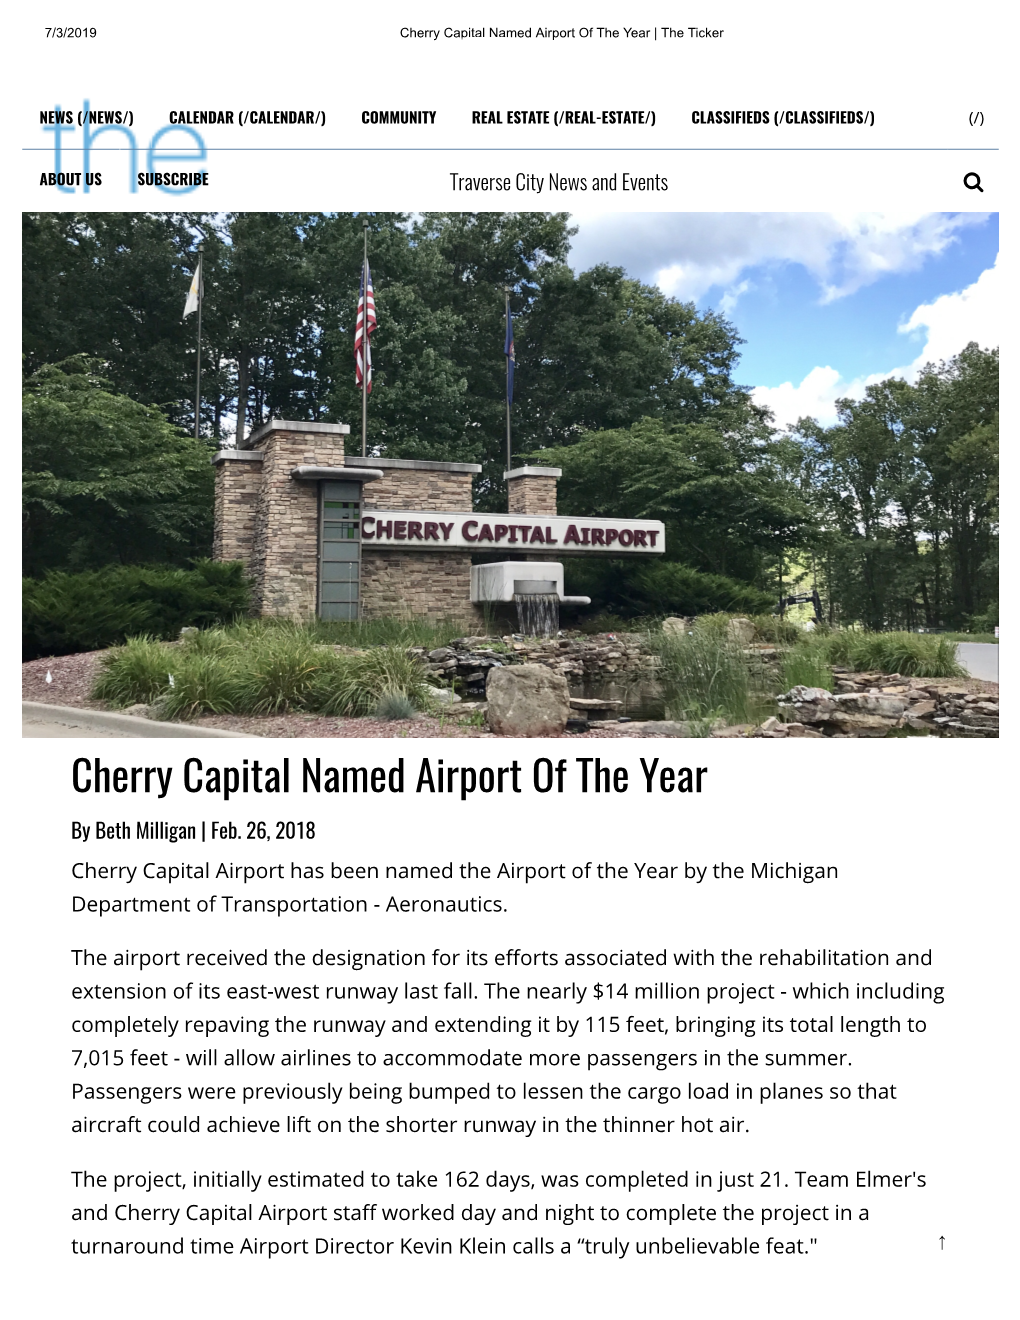 Cherry Capital Named Airport of the Year | the Ticker